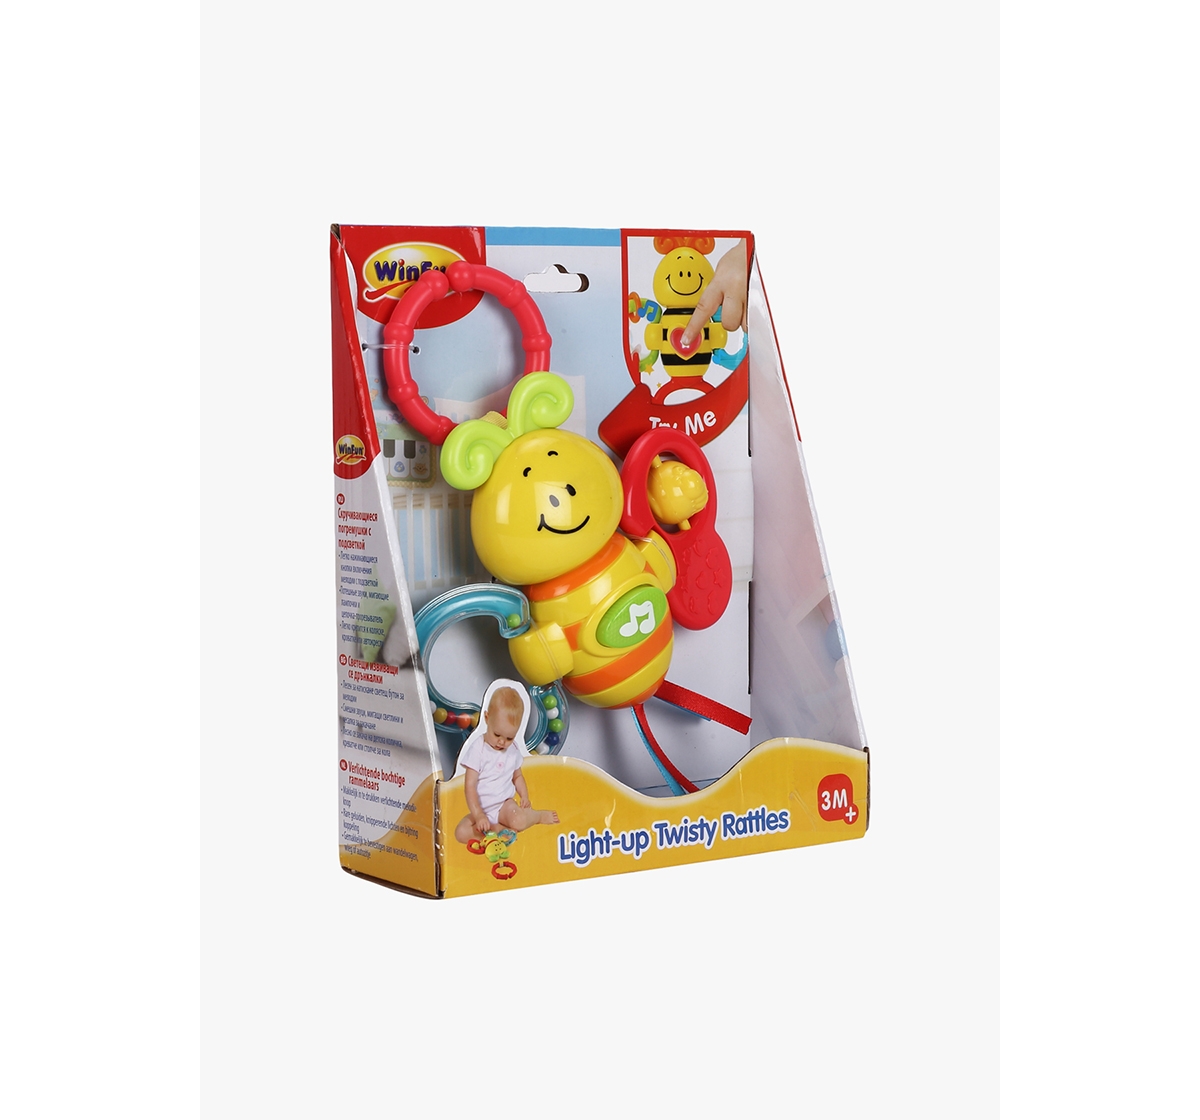 WinFun | Winfun Light Up Twisty Rattle - Butterfly New Born for Kids age 3M+ 1